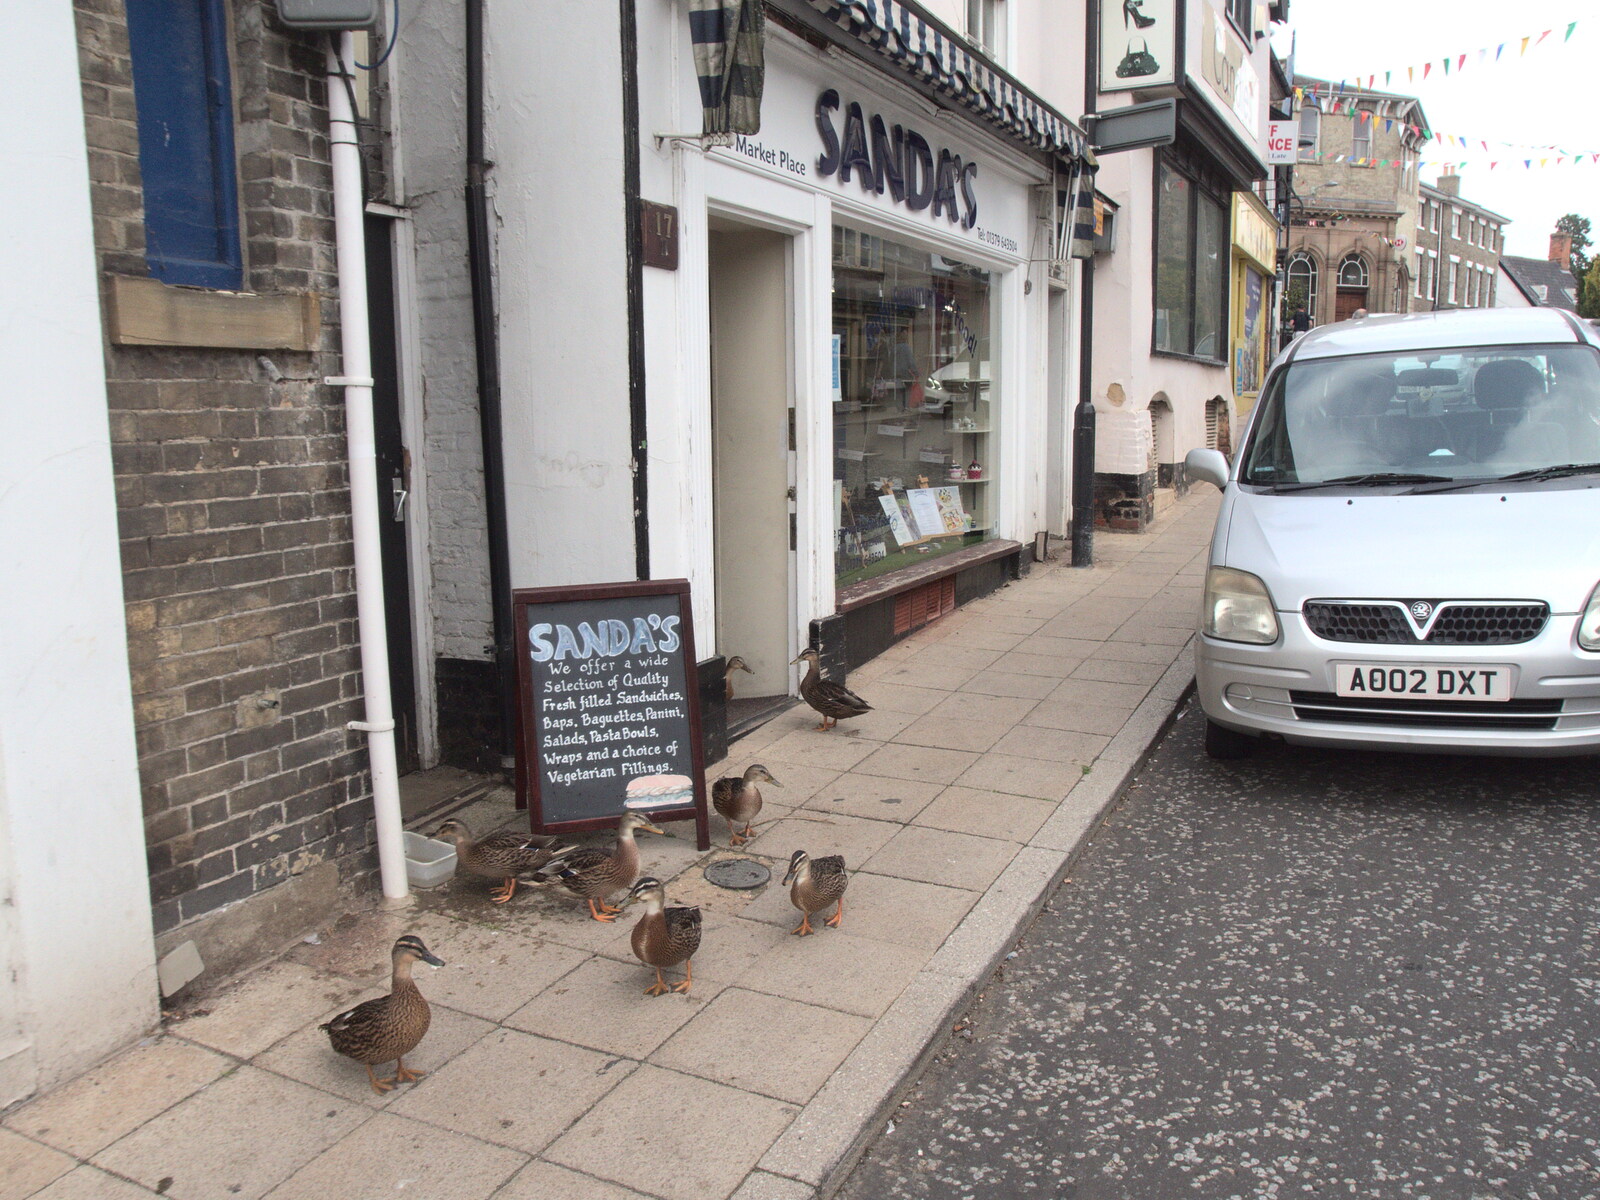 There's a queue of ducks at the sandwich shop from A Few Hours at the Fair, Fair Green, Diss, Norfolk - 5th September 2021